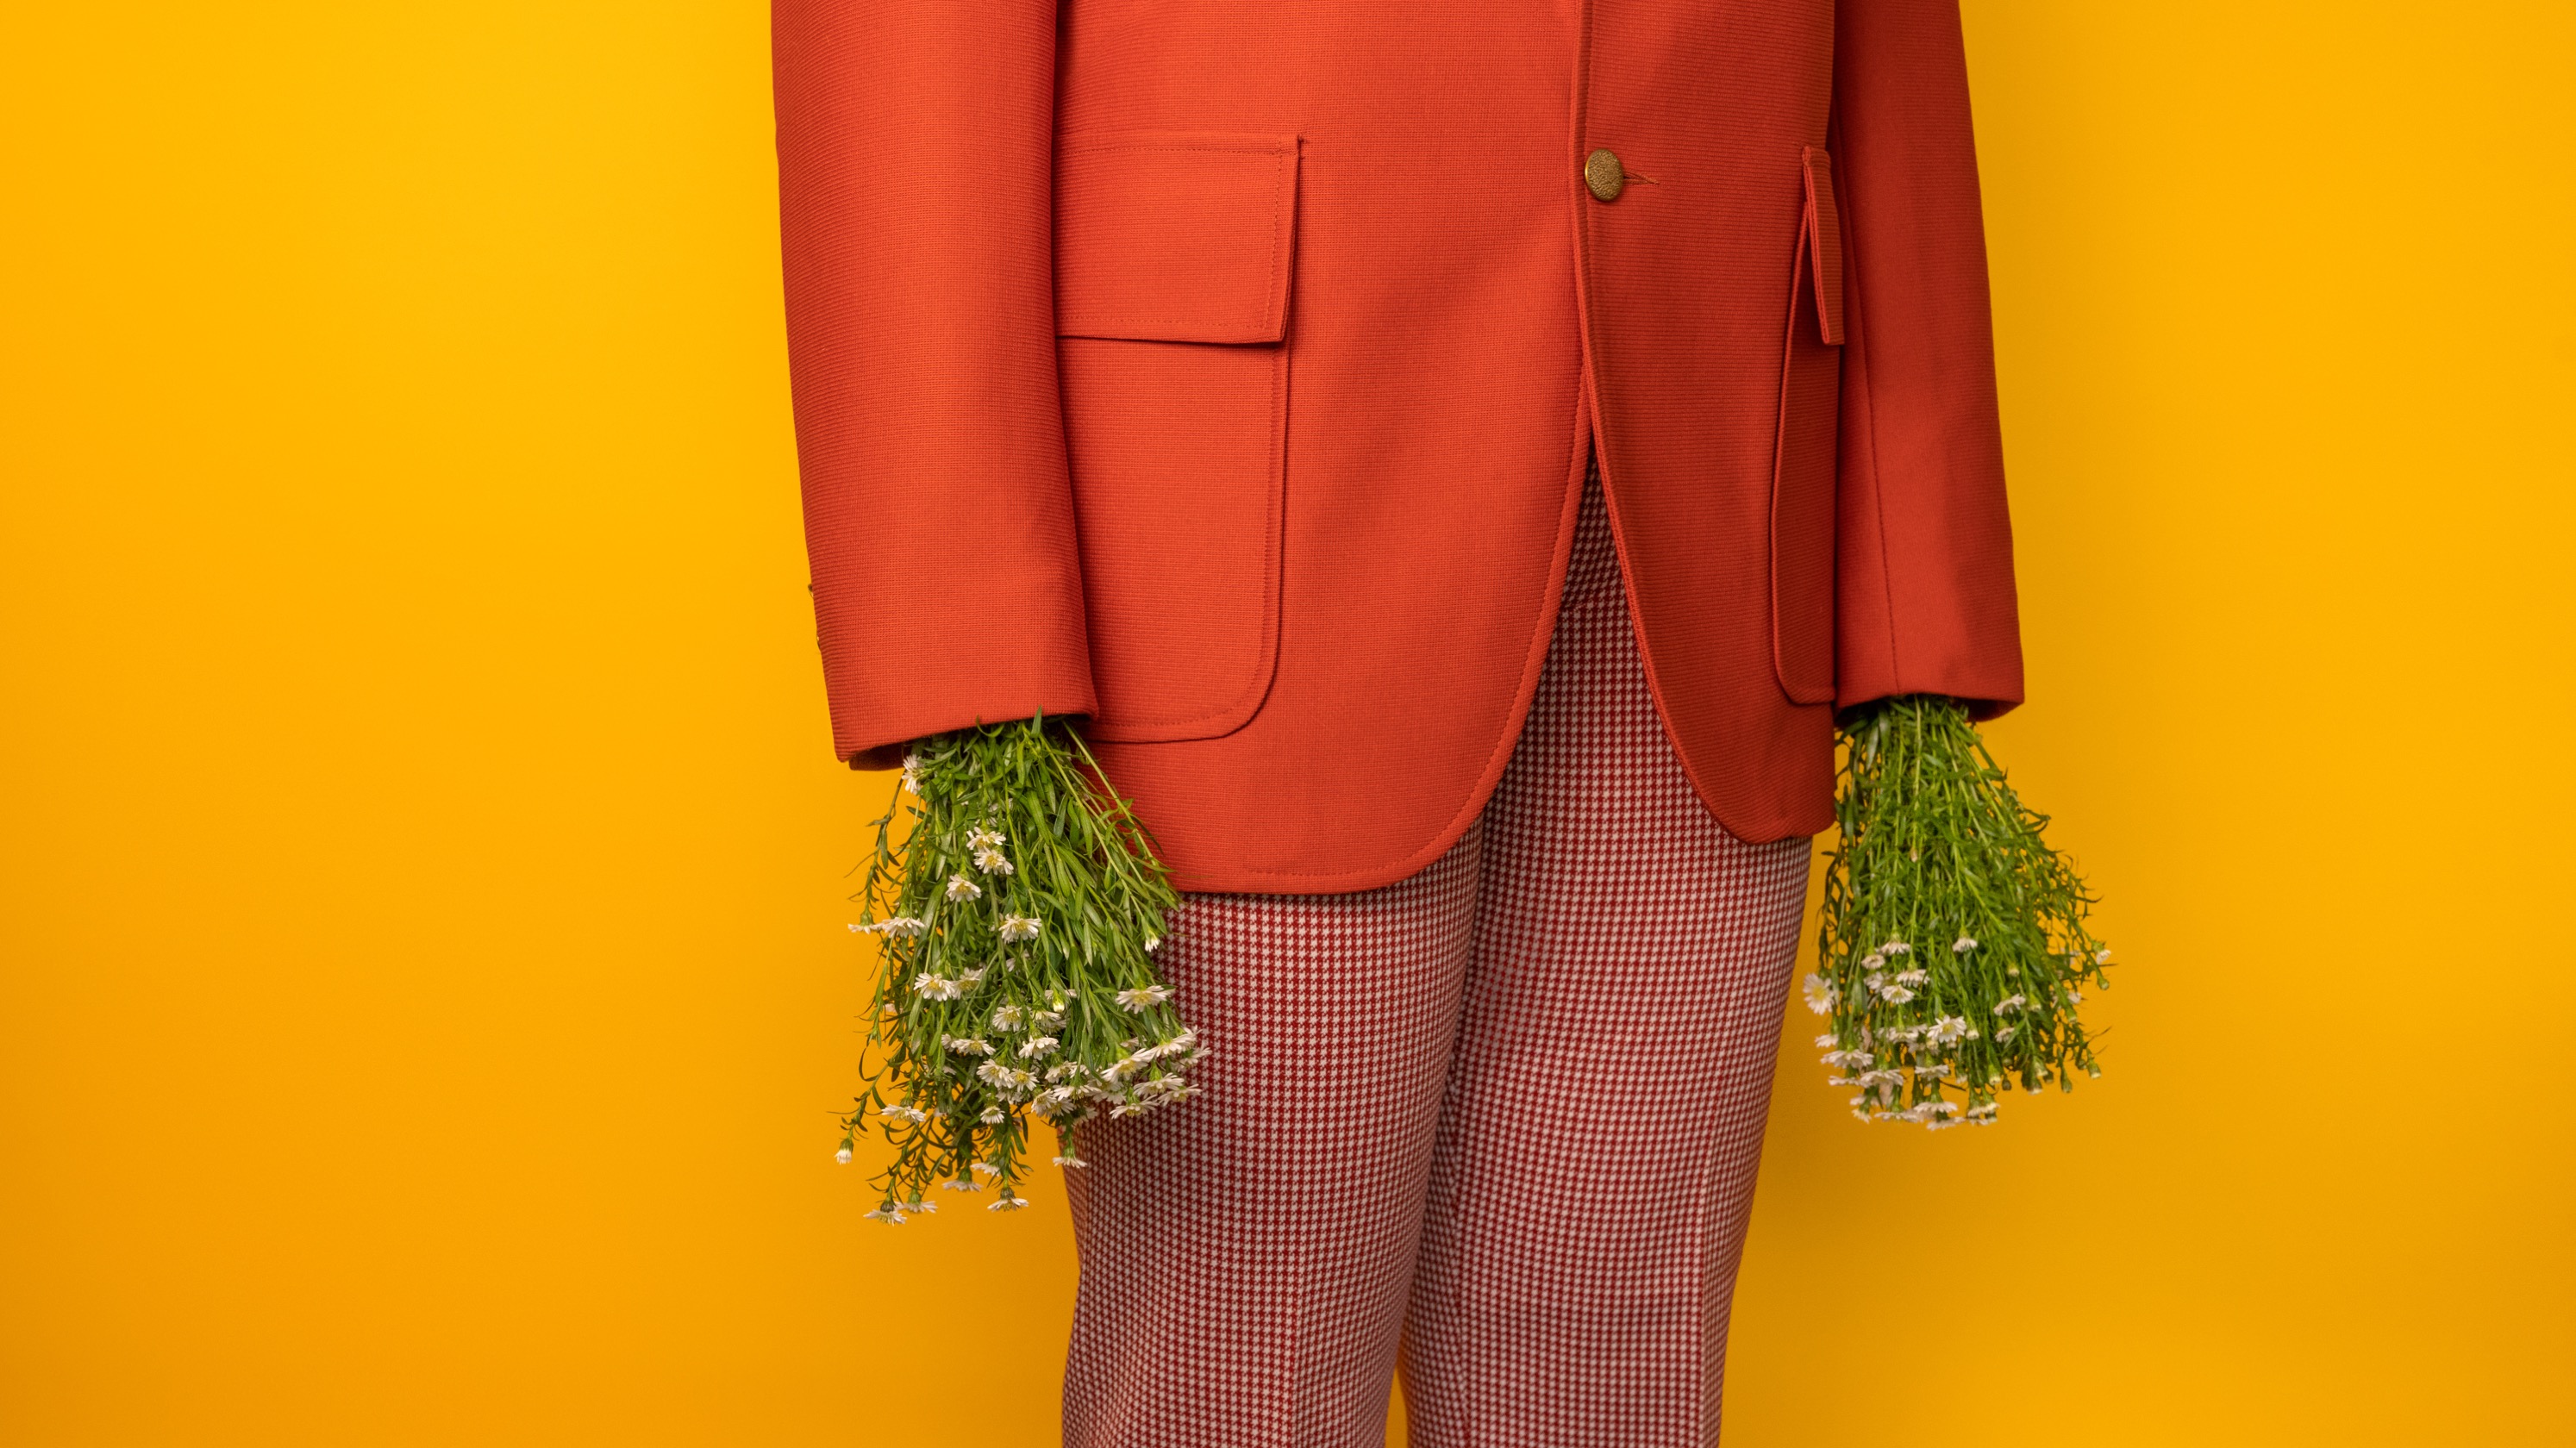 Close-up of a person's torso wearing a brightly-colored suit. Instead of hands, bushels of flowers stick out of the sleeves.